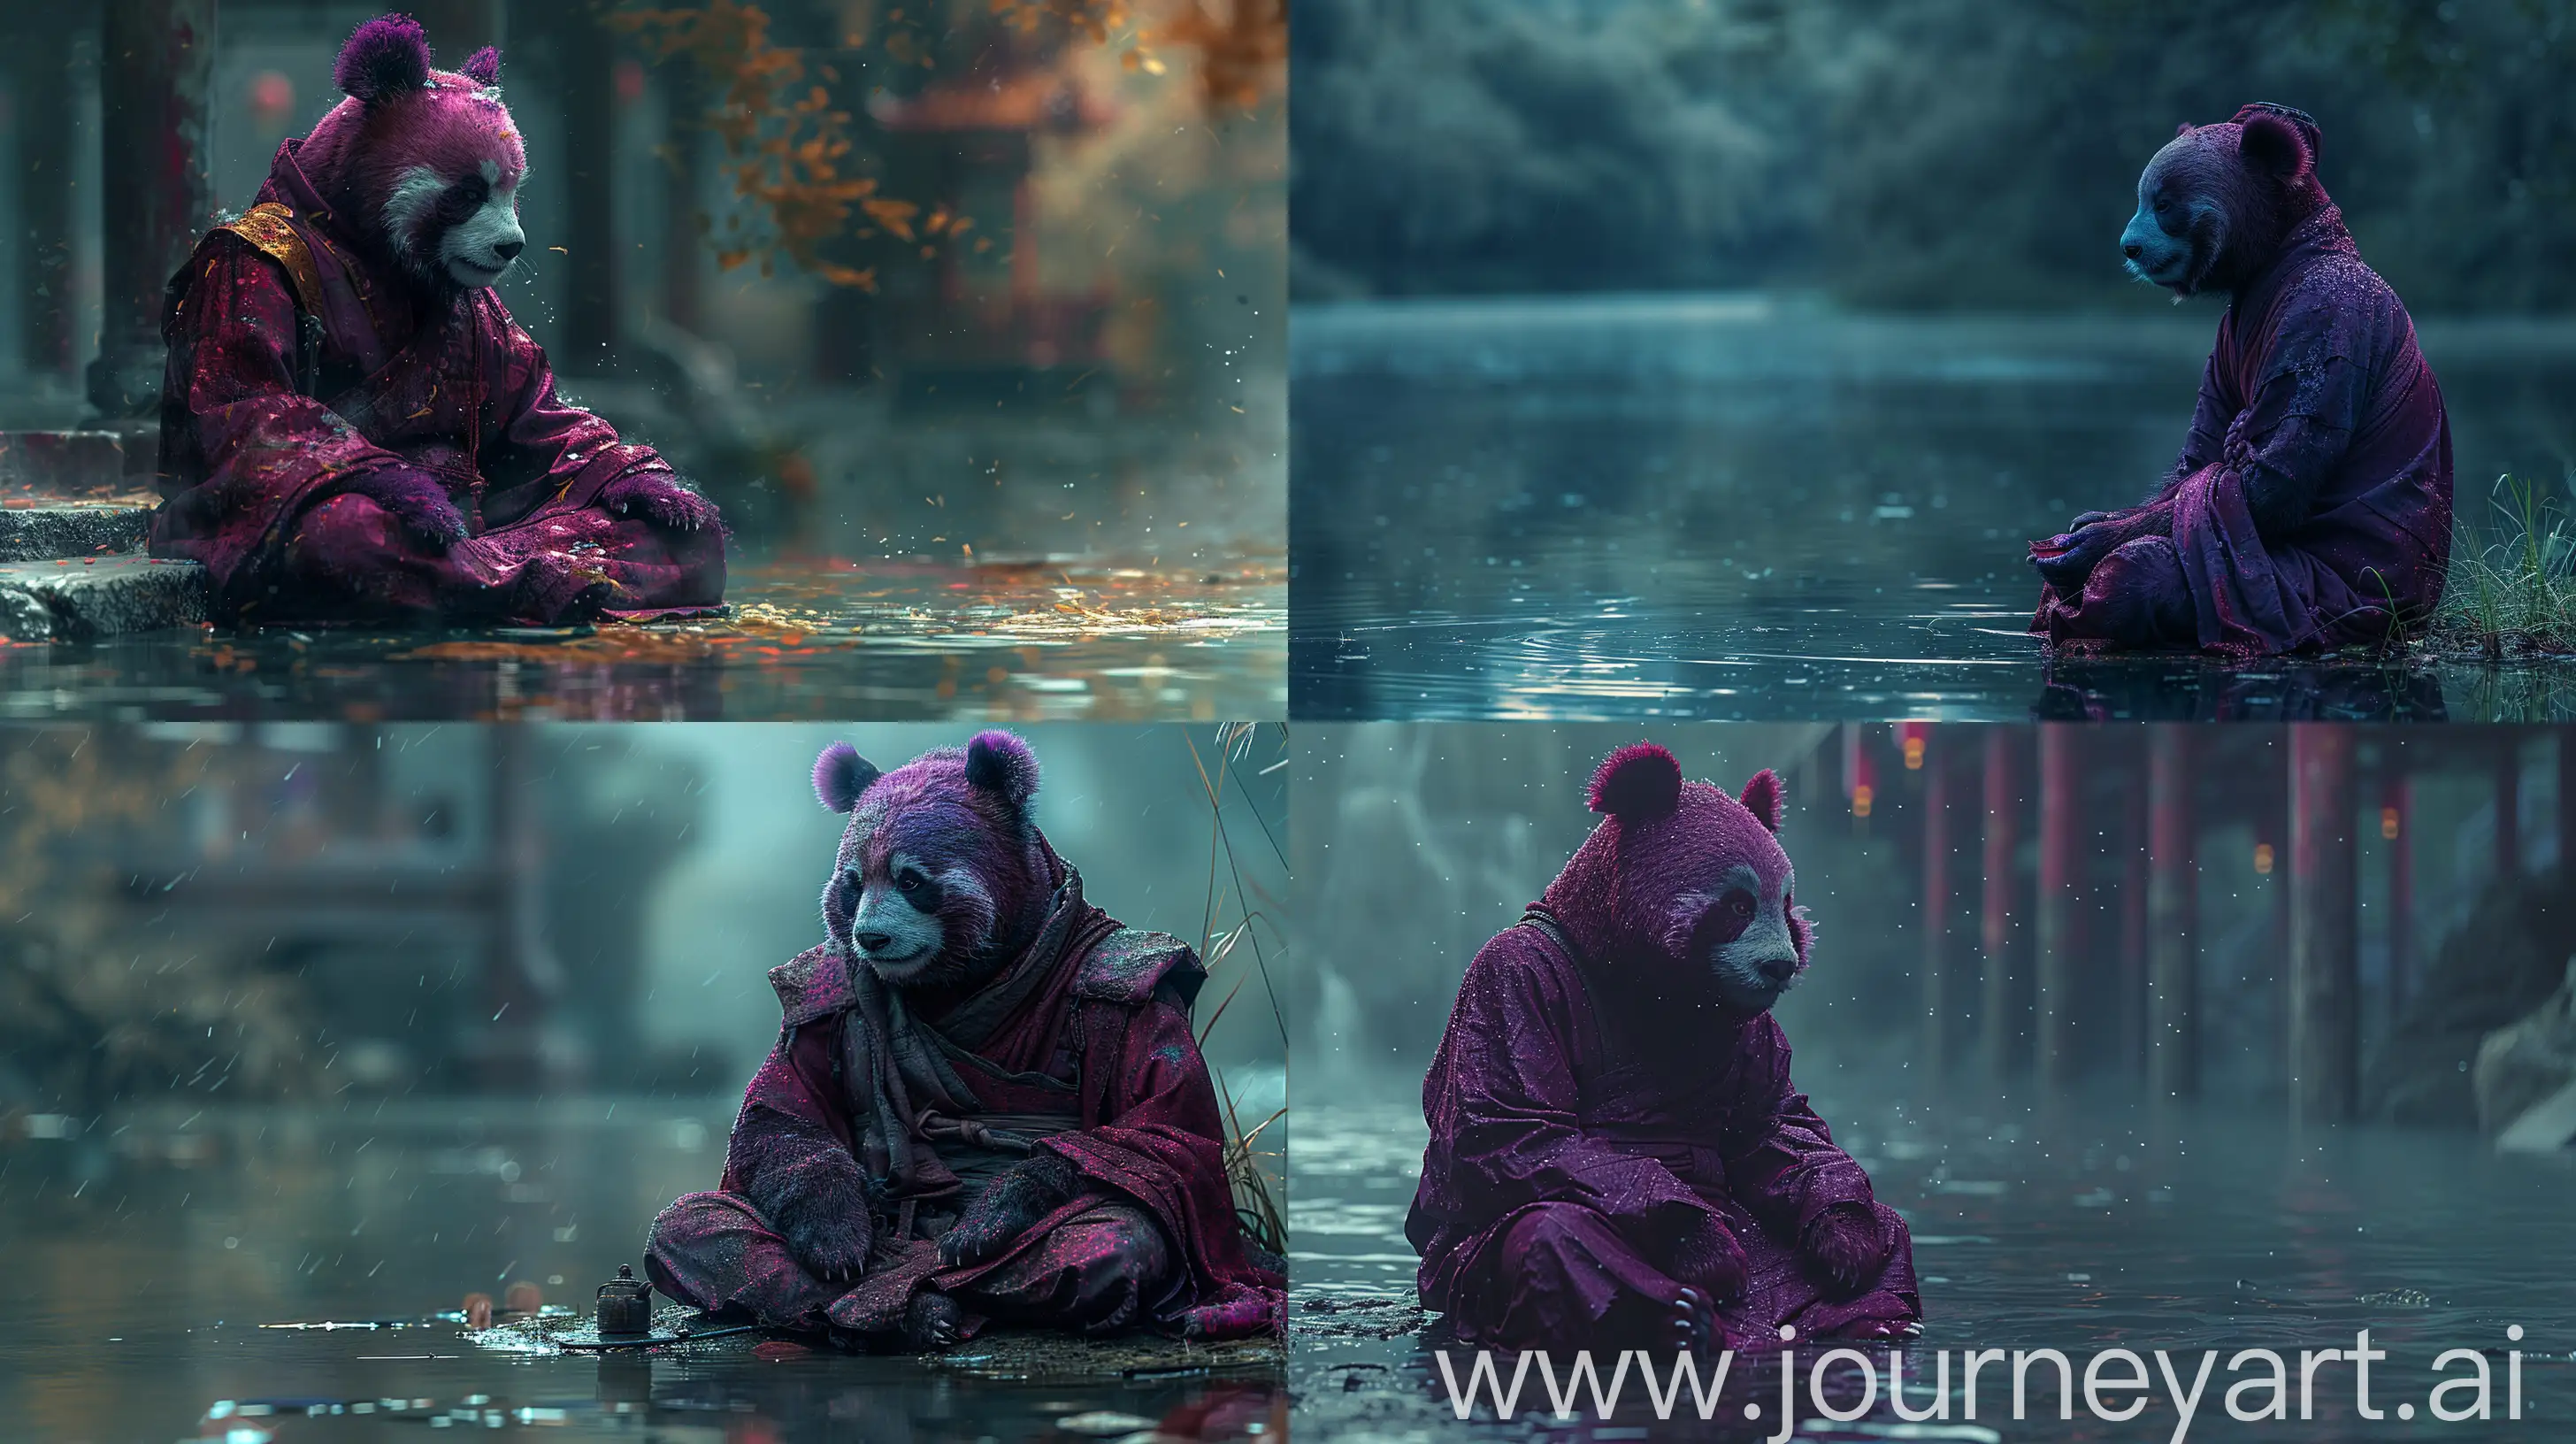 Tranquil-Purple-Panda-Monk-Meditation-by-the-Water